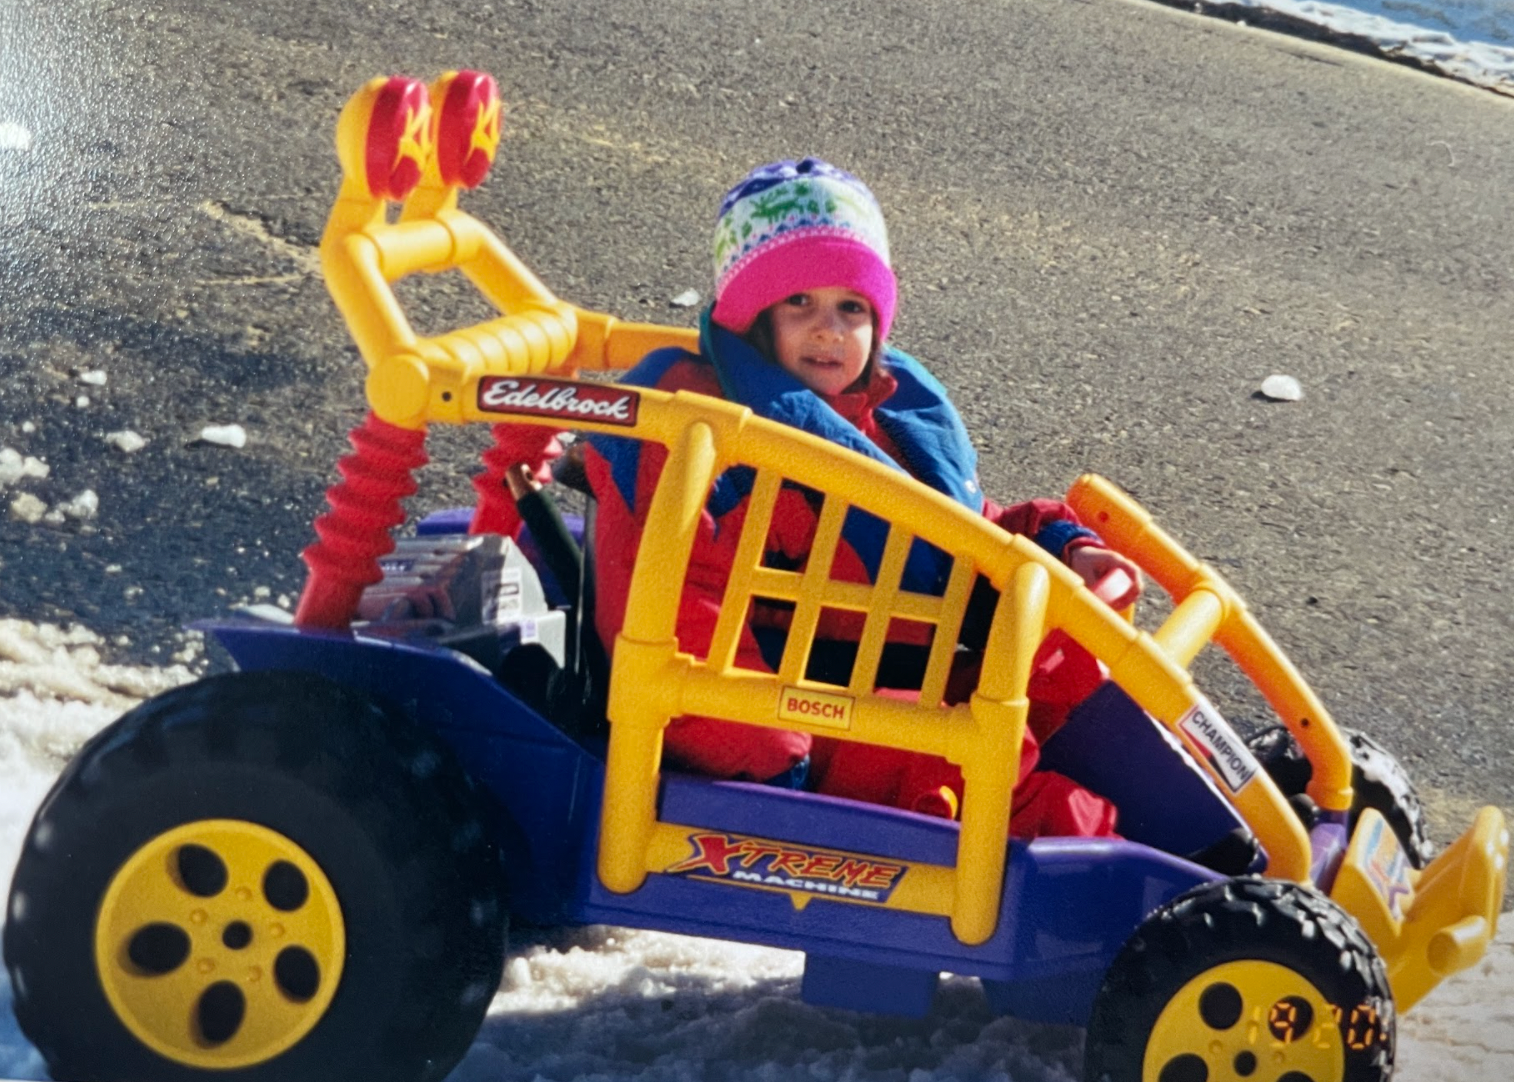 Young Ghenwa bundled up in a hat and big jacket, driving a toy car on a snowy road